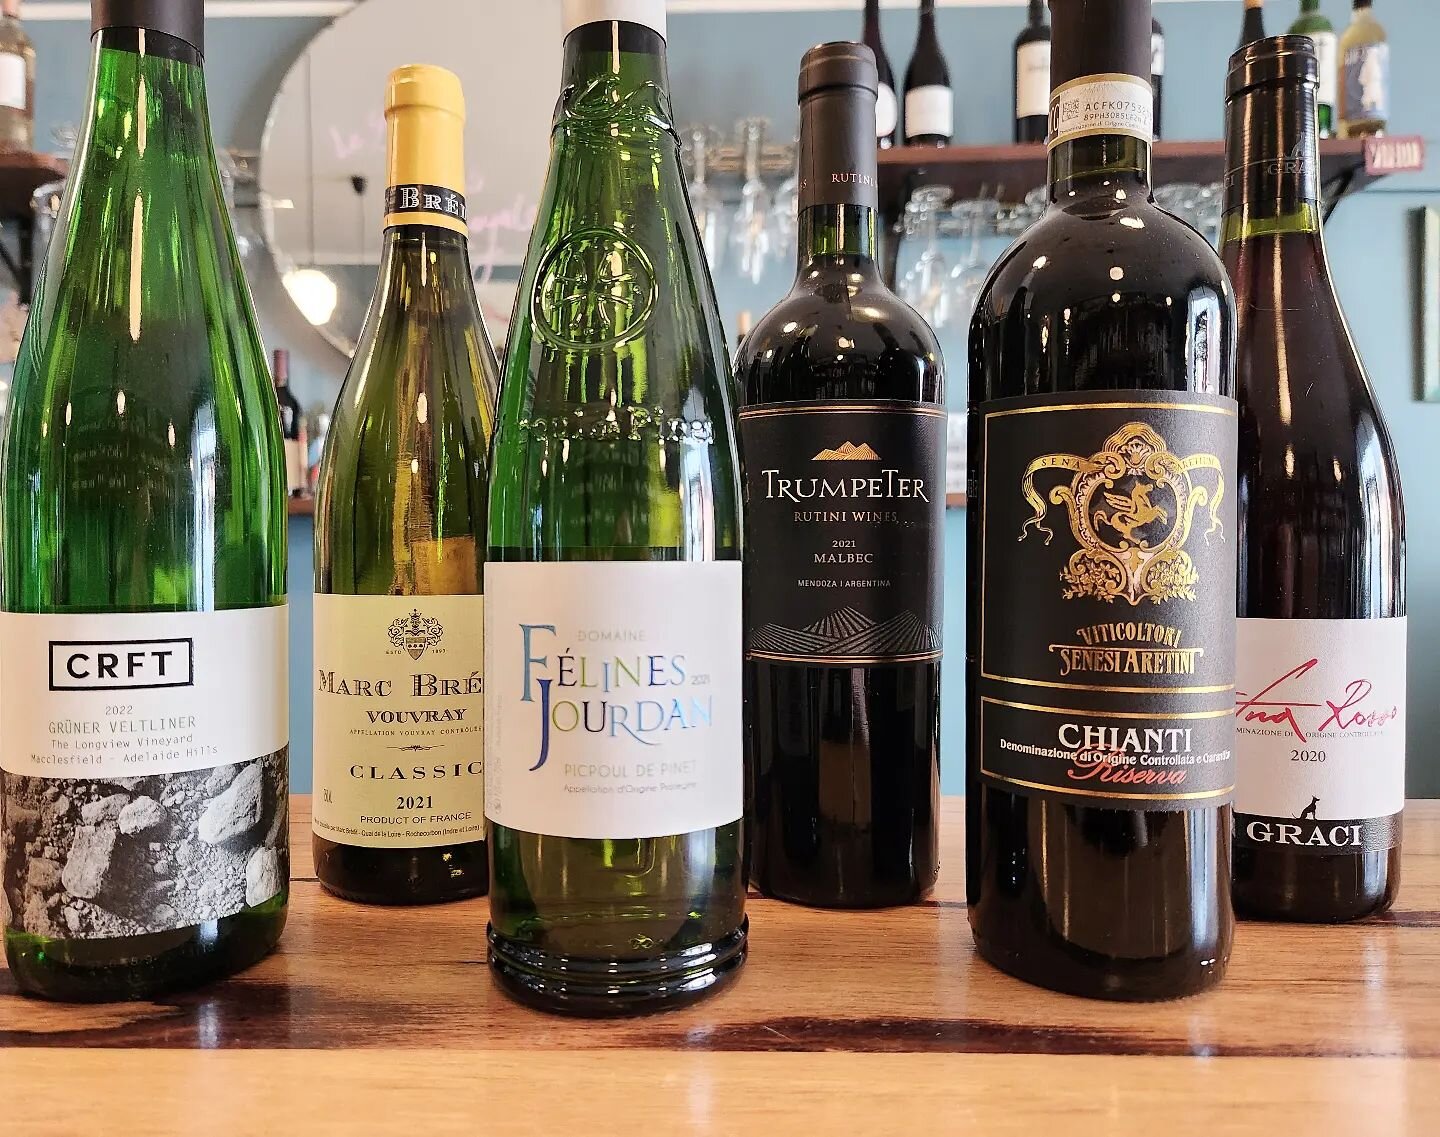 Happy Friday! We've got a brand new wine list for the weekend, including a single site, Adelaide Hills Gruner Veltliner, a rich and vibrant Vouvray, a 'Chablis of the South' in our Picpoul, some classic Chianti, a moreish Malbec and a smashing Etna R